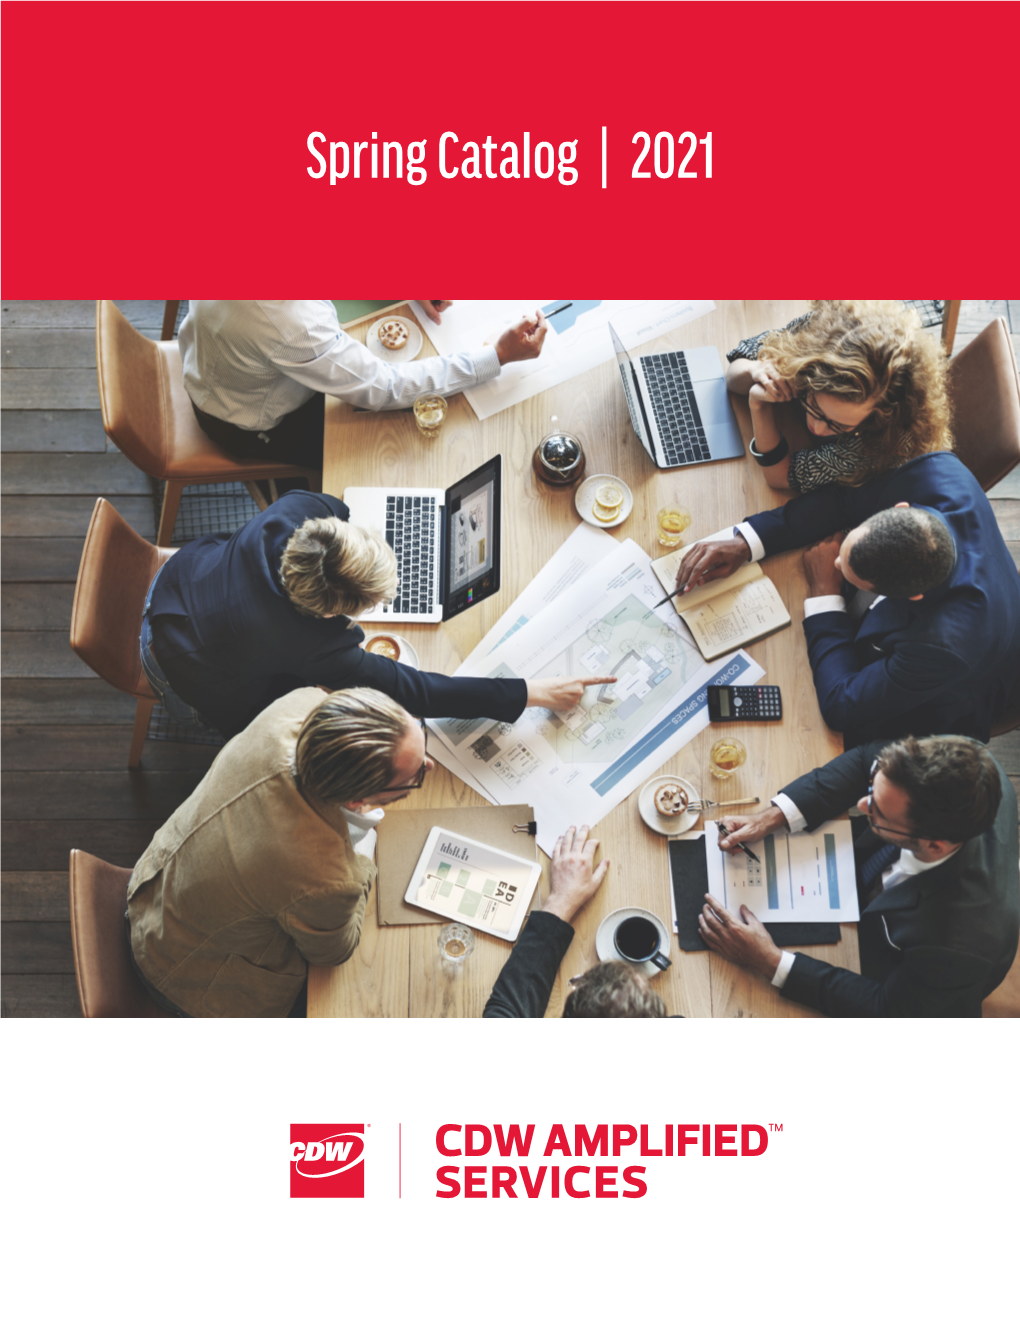 CDW Amplified Services Catalog Spring 2021